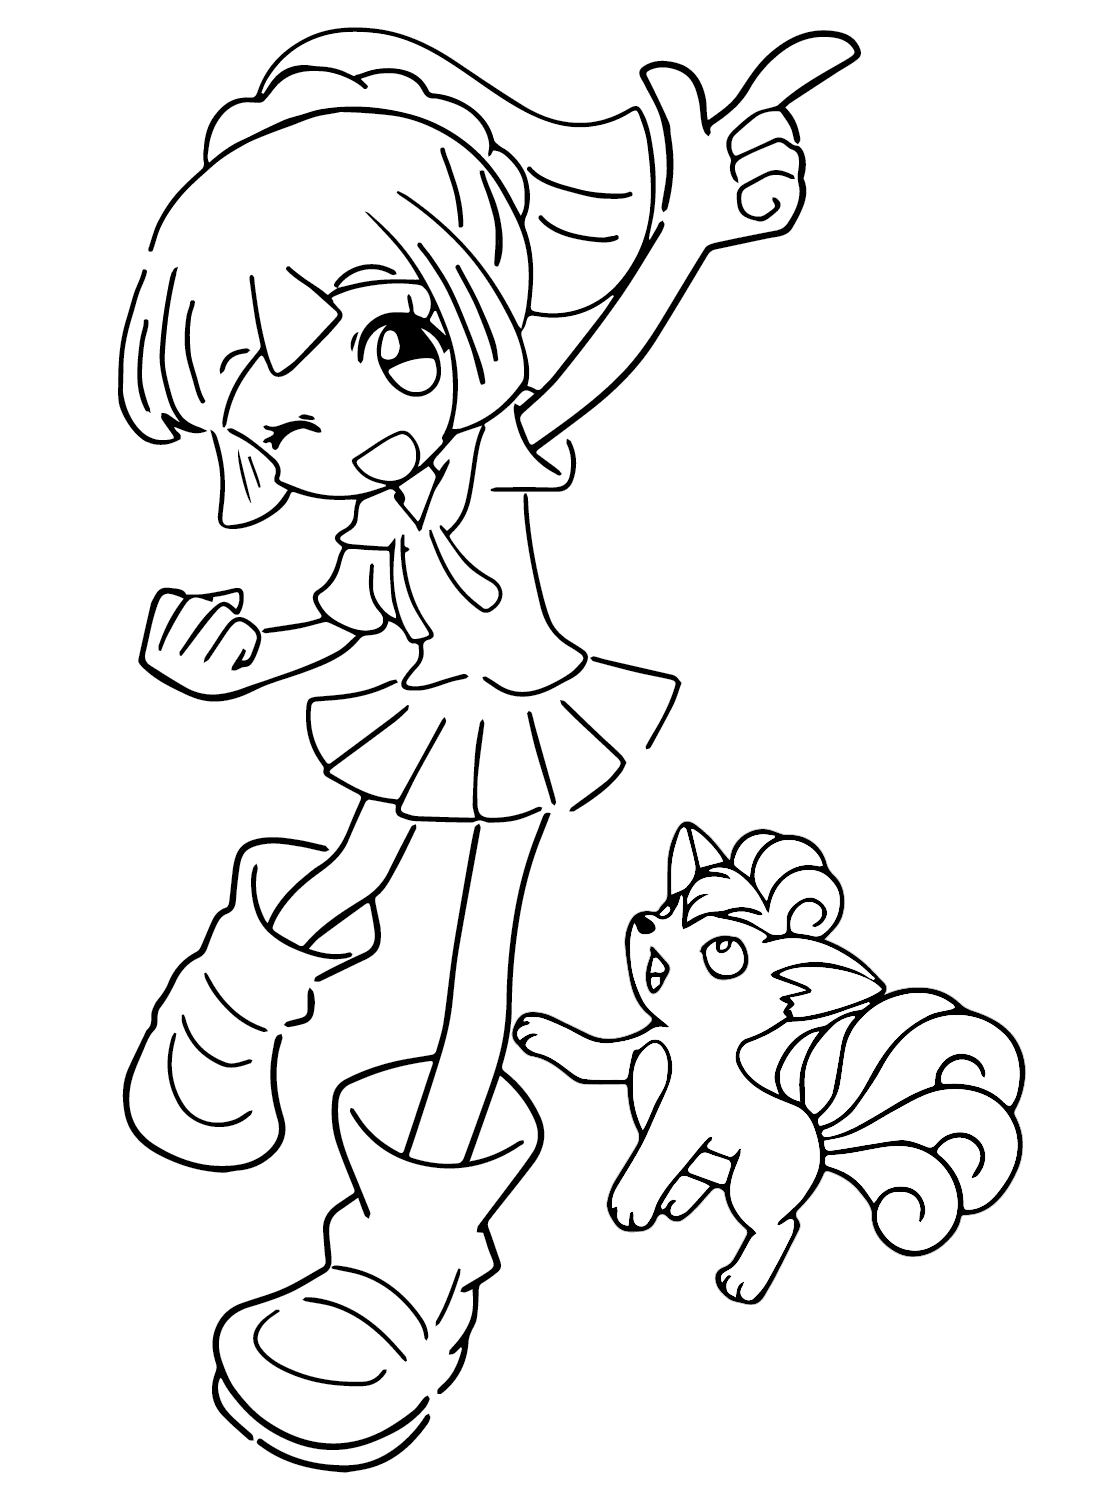 Lillie, Shiron Pokemon Coloring Page Images from Lillie Pokemon